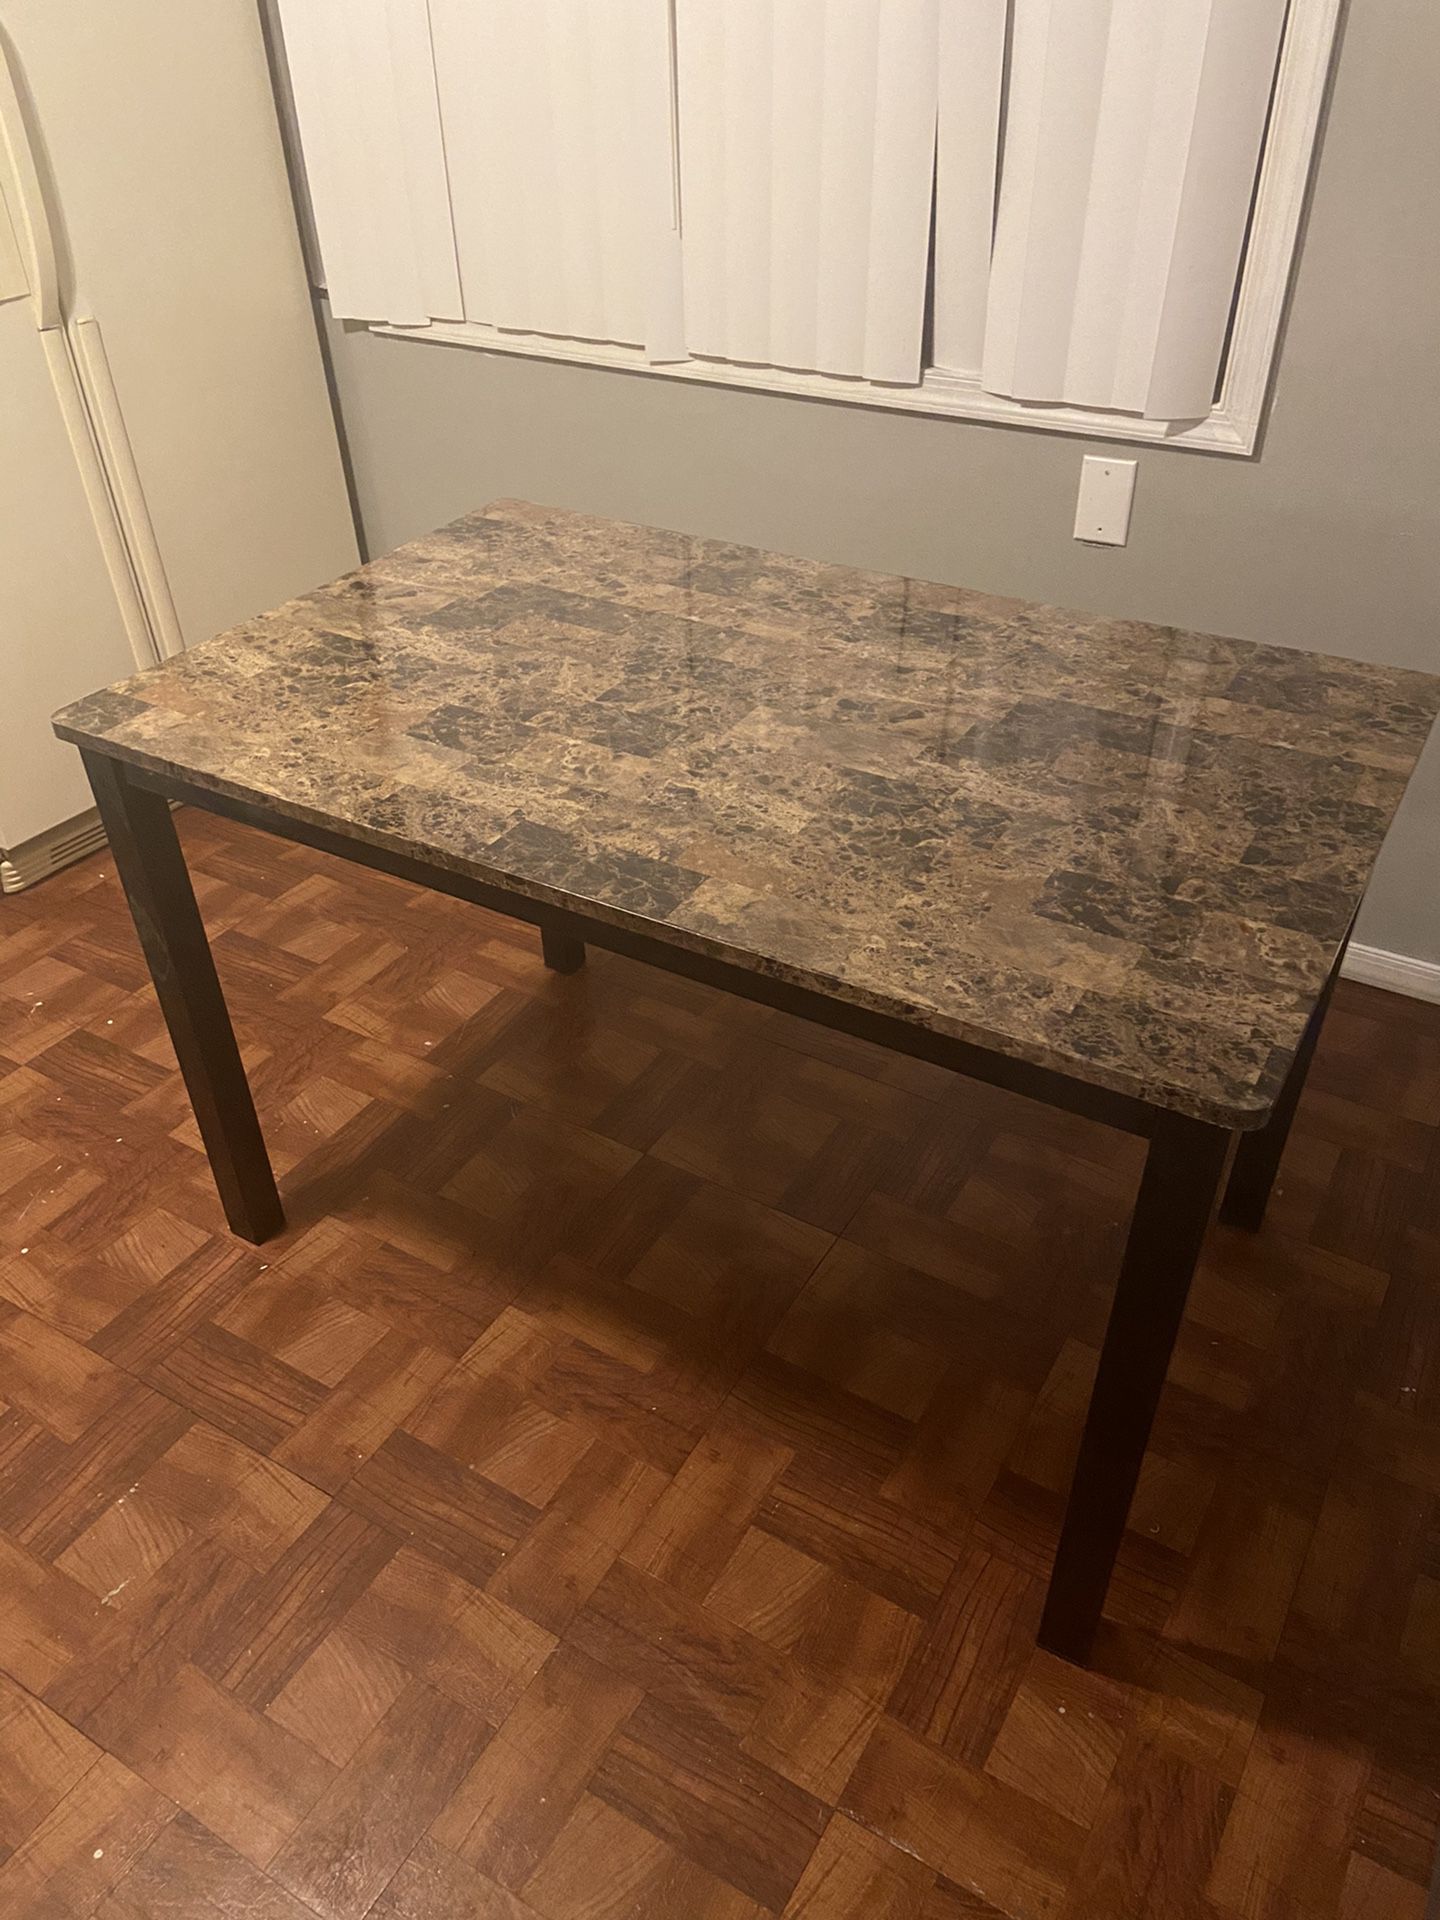 only the table in good condition